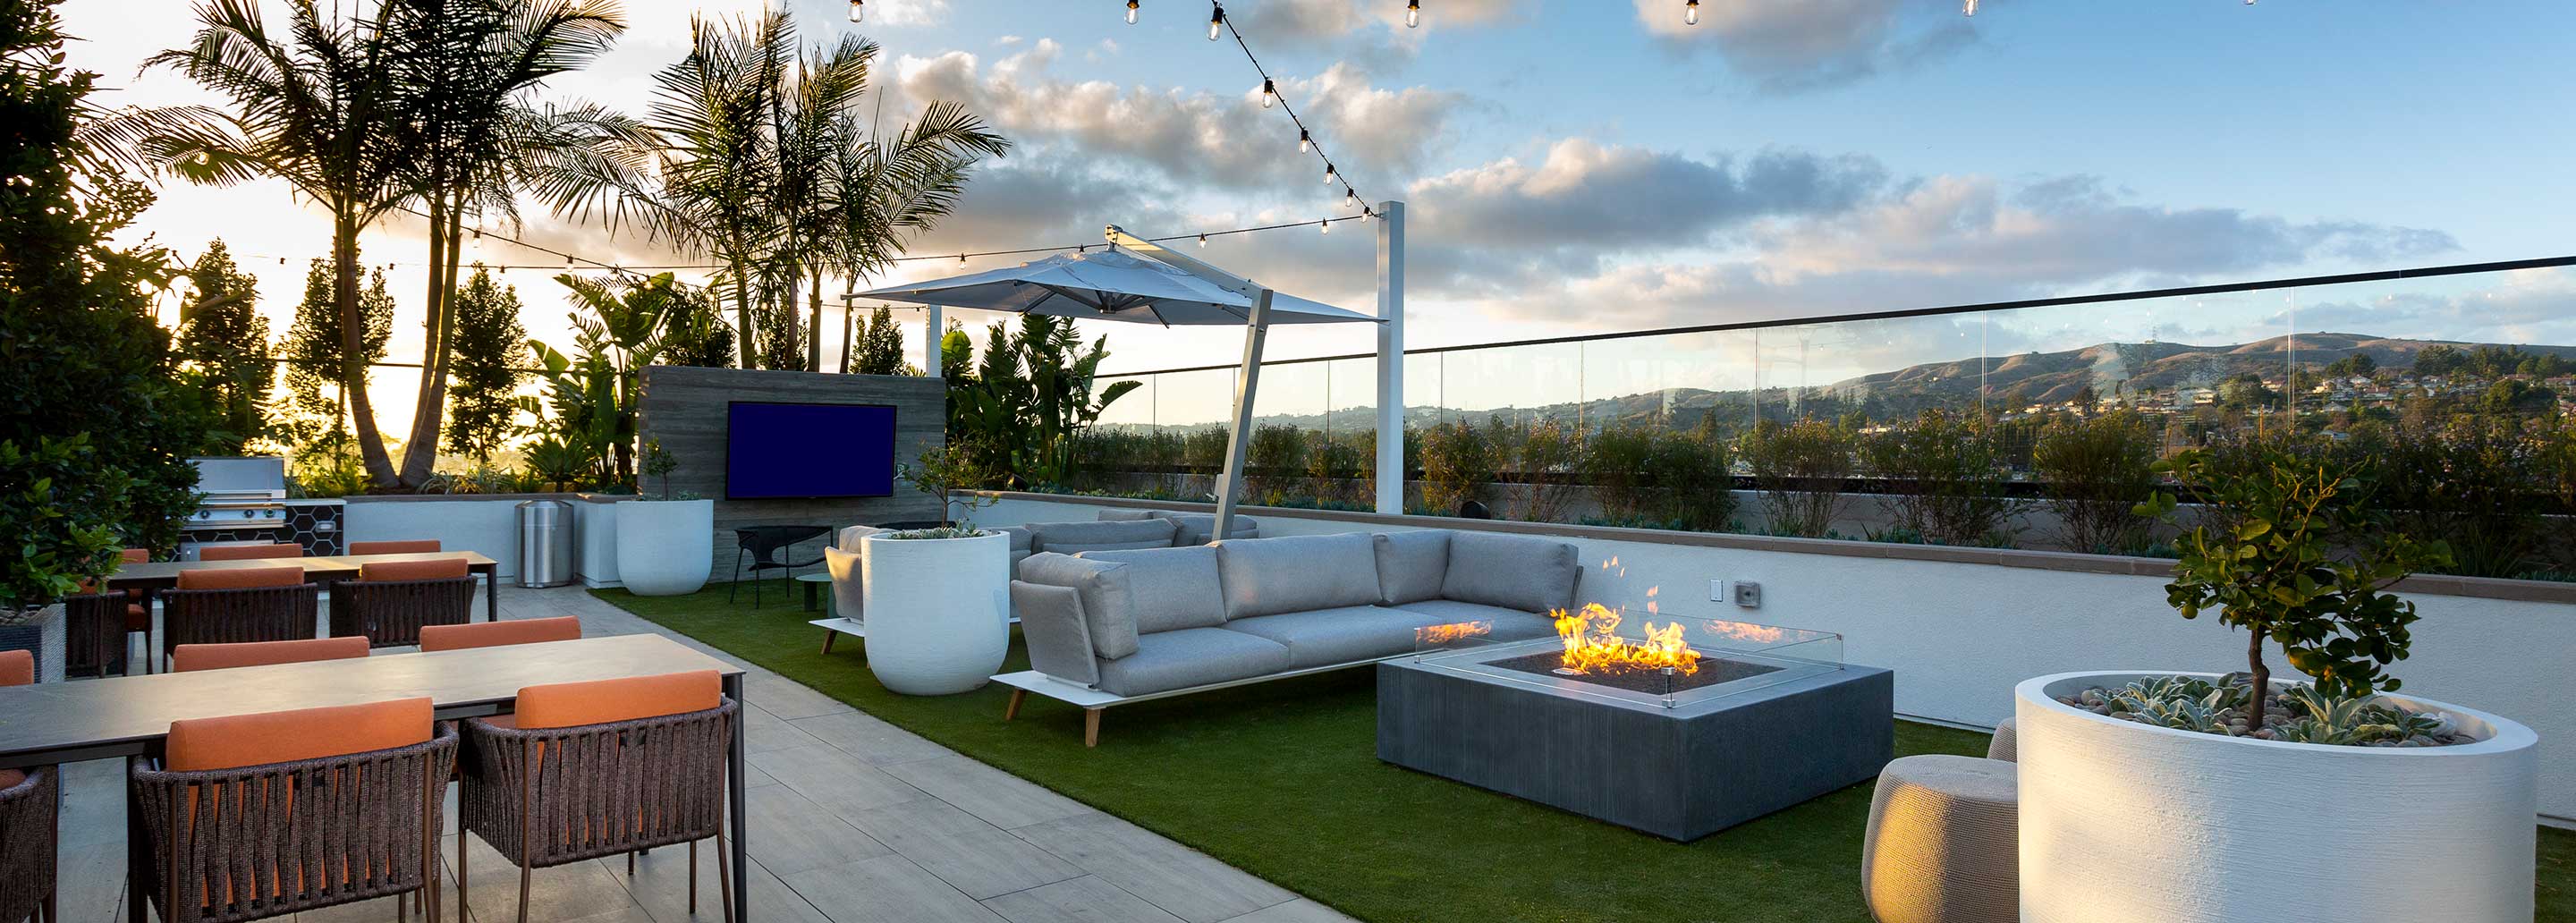 Avalon Brea Place Building B rooftop lounge with fireplace and lounge seating